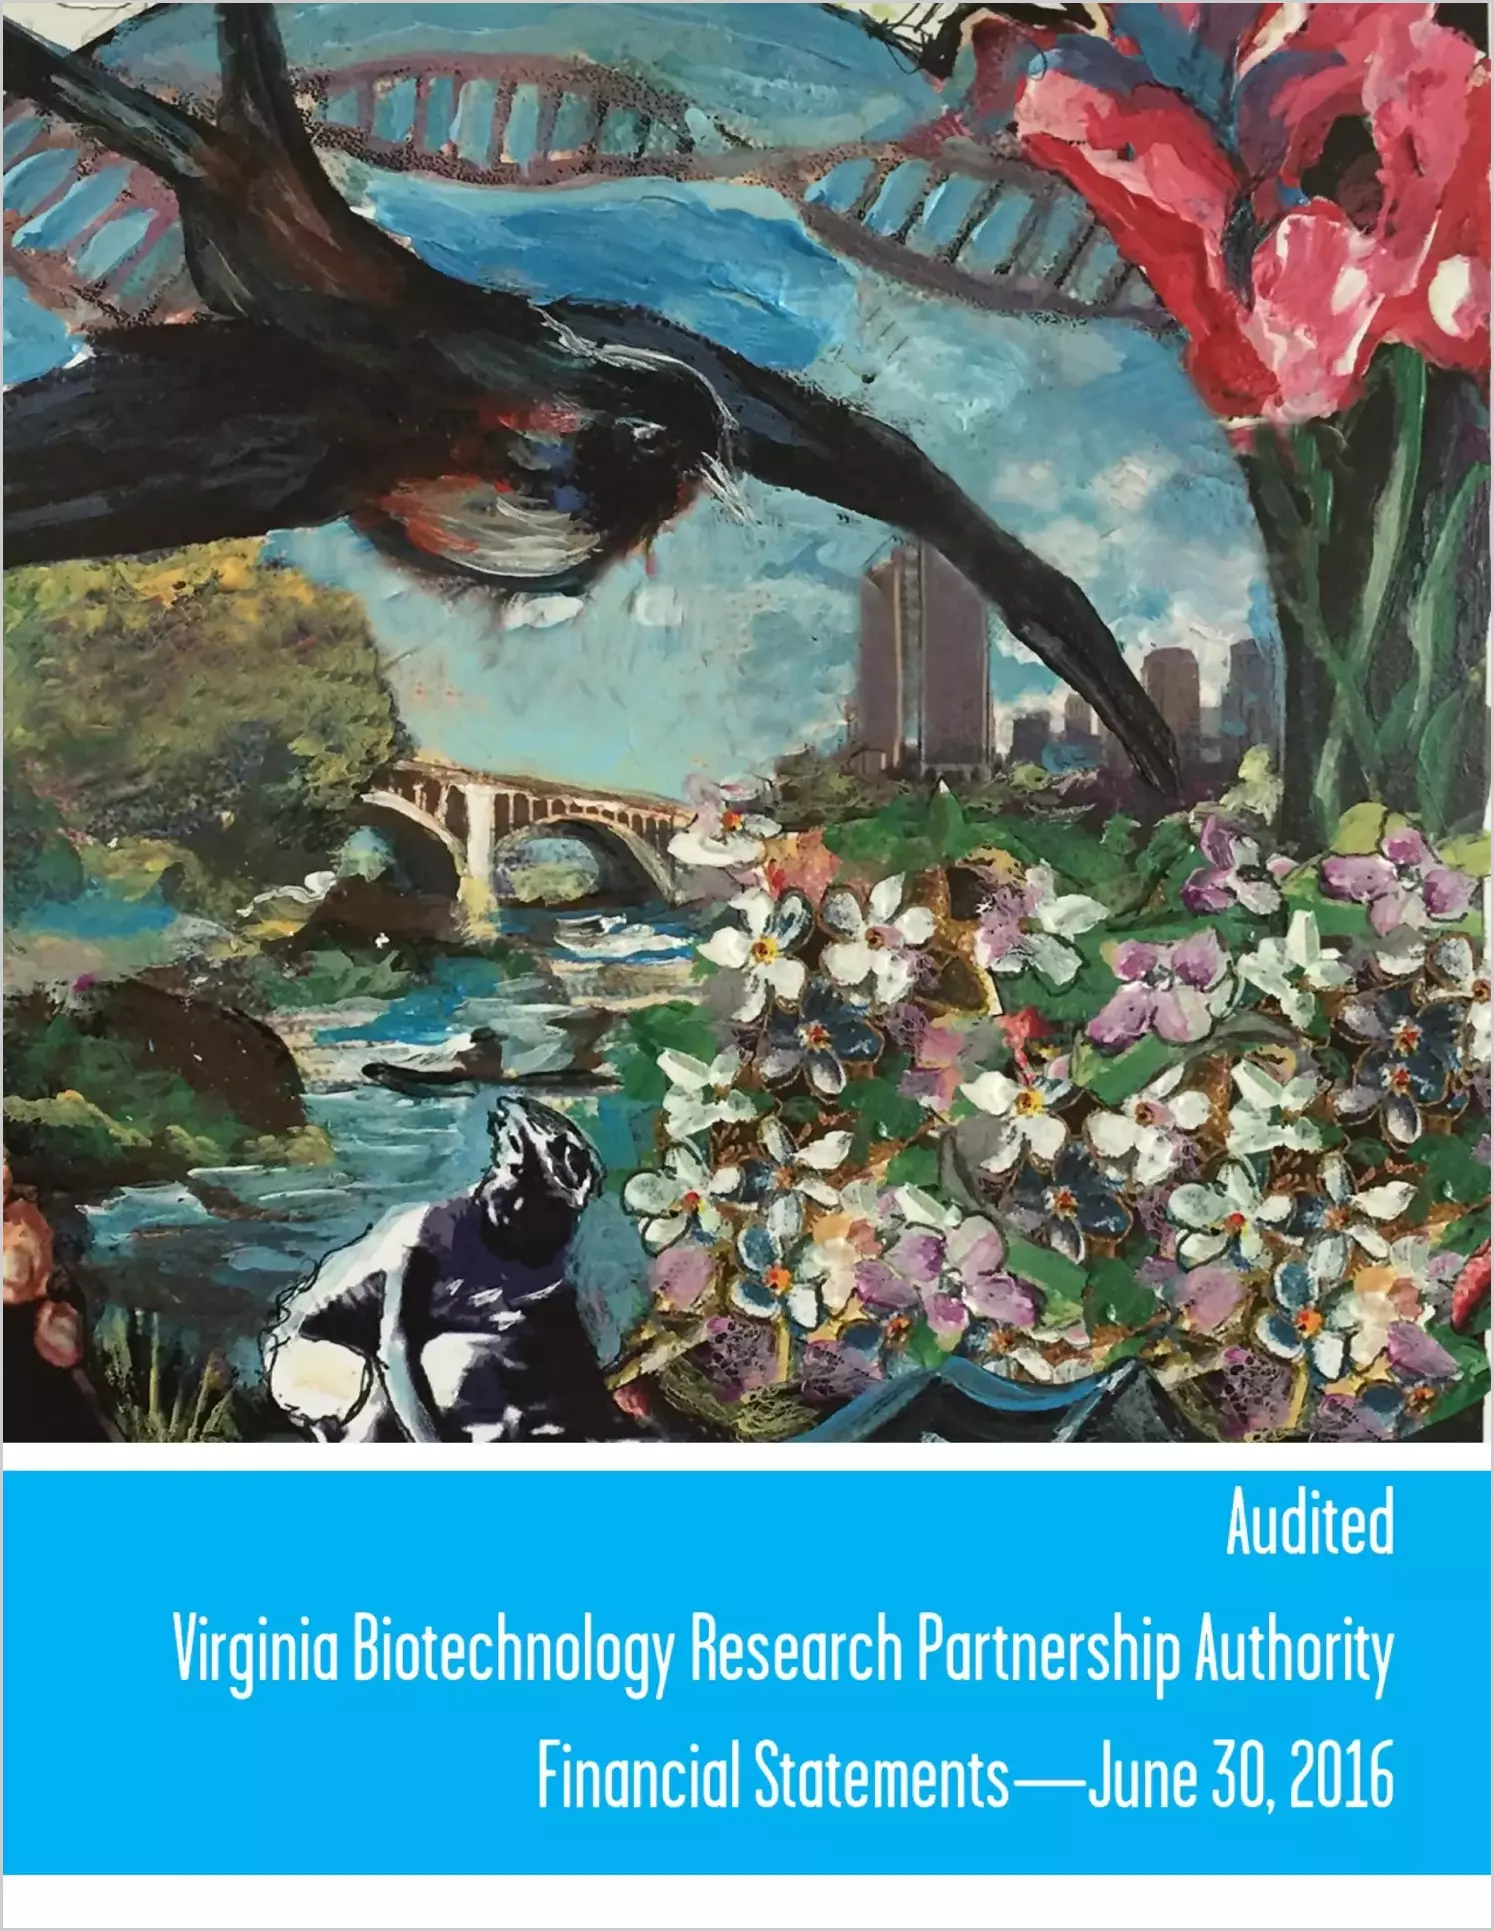 Virginia Biotechnology Research Partnership Authority Financial statements for the year ended June 30, 2016